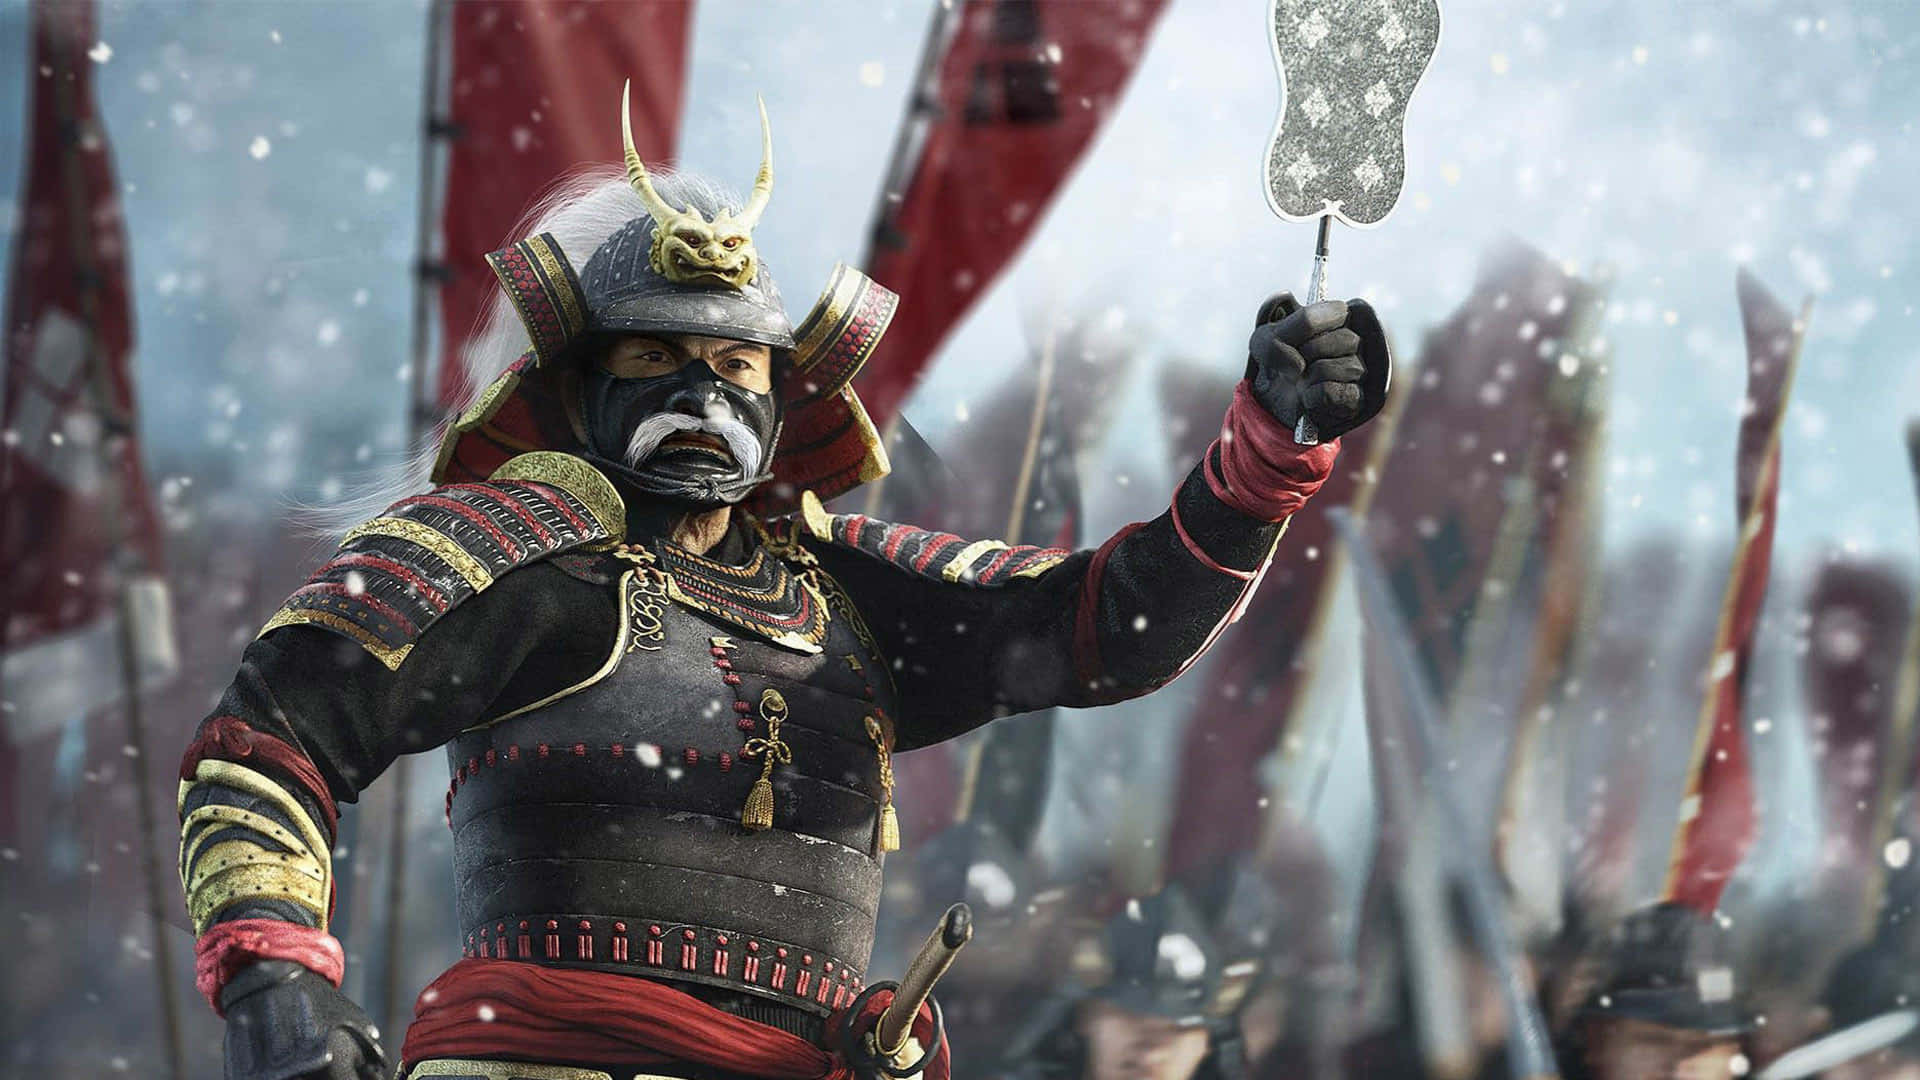 "Unleash chaos and sow the seeds of victory in Shogun Total War" Wallpaper